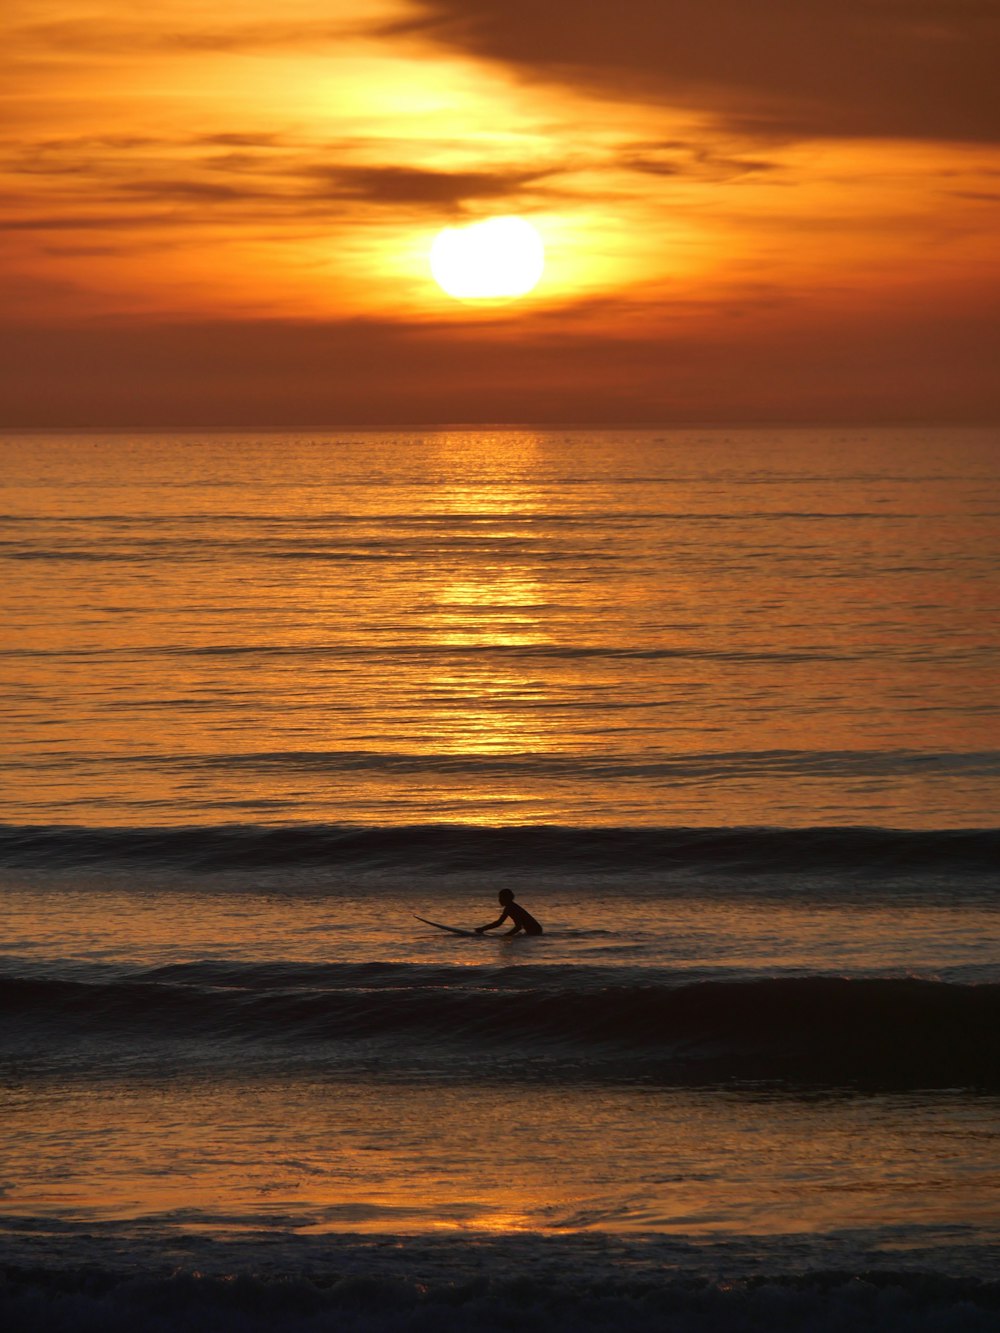 a person riding a surfboard on a wave at sunset